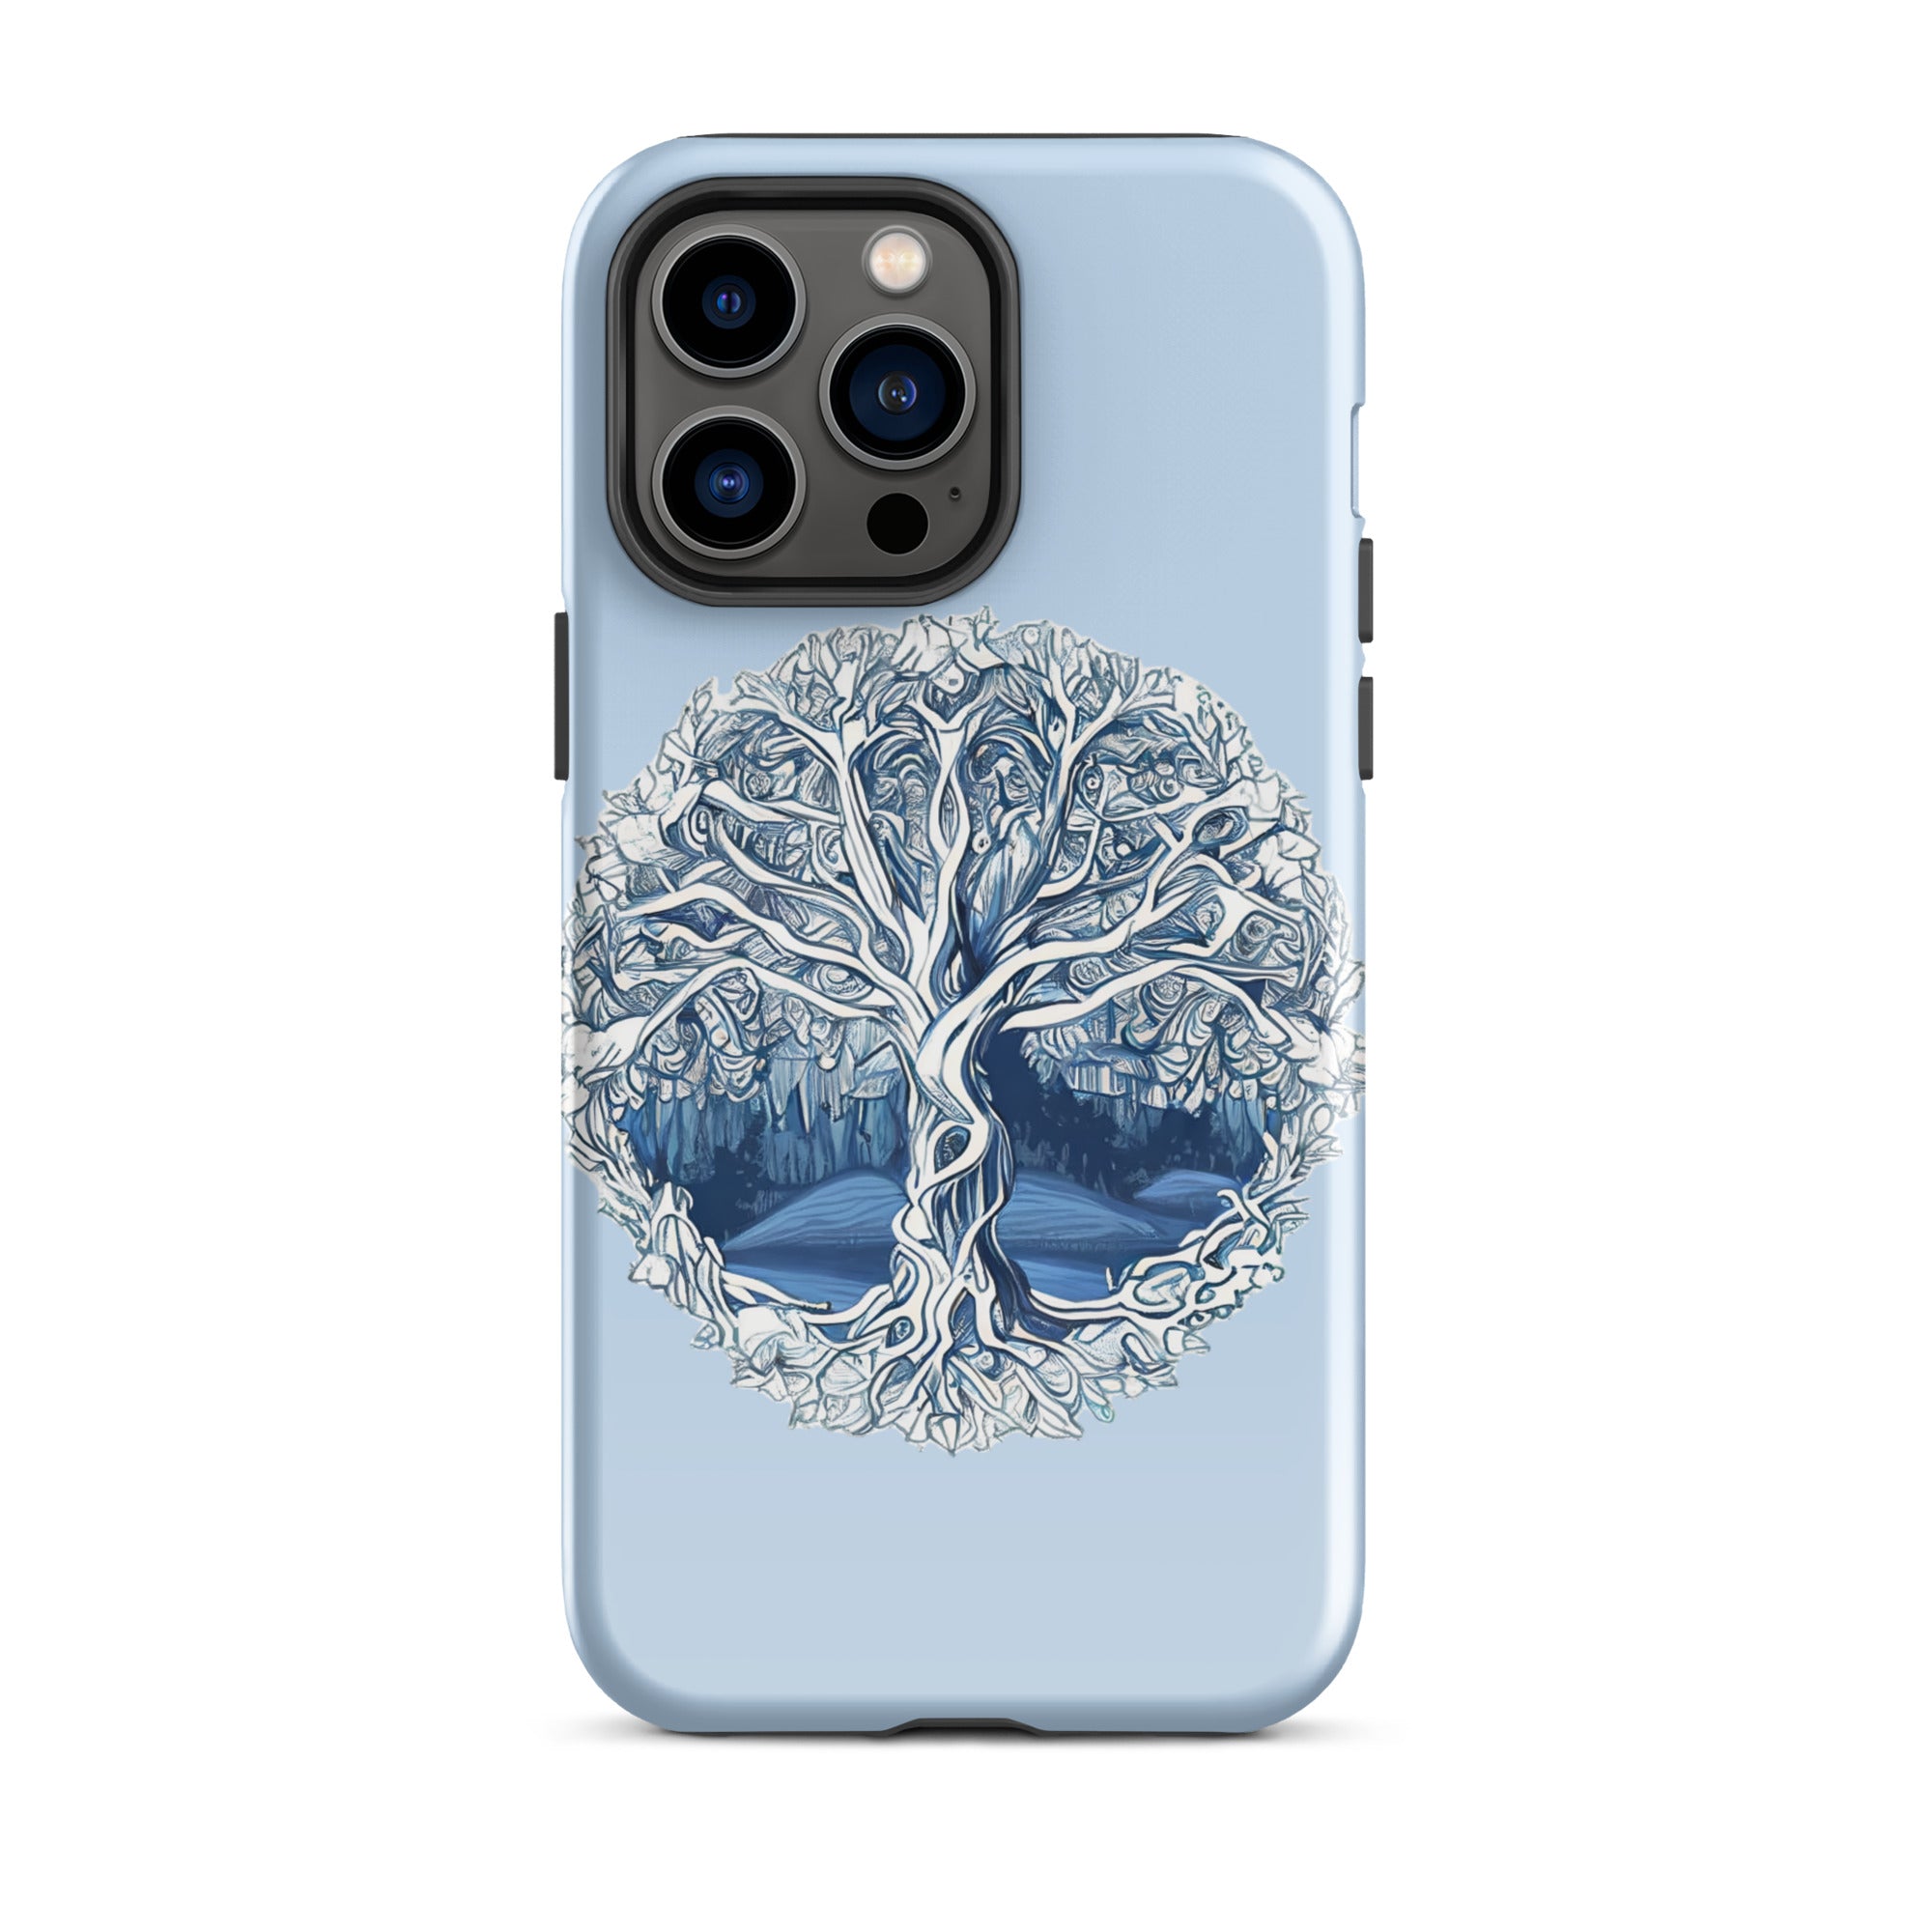 tough-case-for-iphone-glossy-iphone-14-pro-max-front-656e0a3713516.jpg